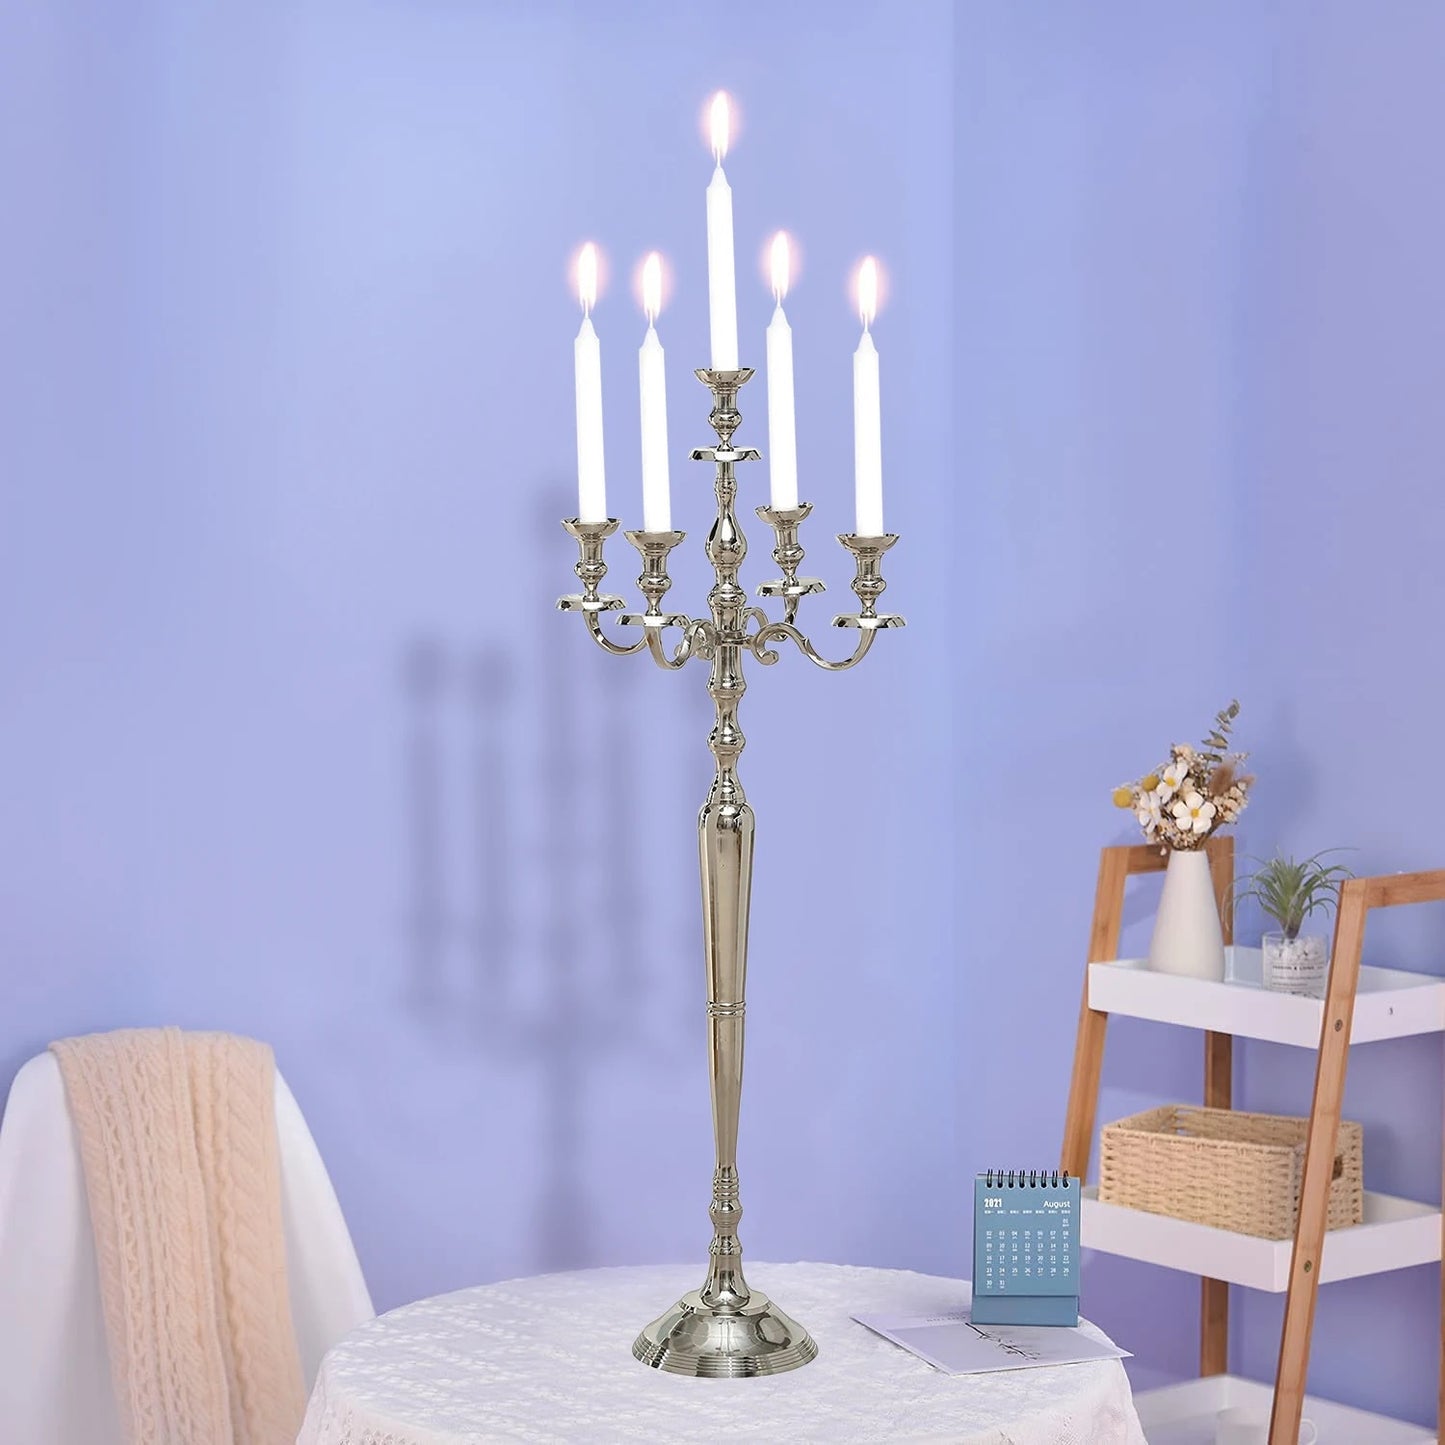 40 INCH OR 3 Foot Tall Floor Candelabra Candle Holder Silver